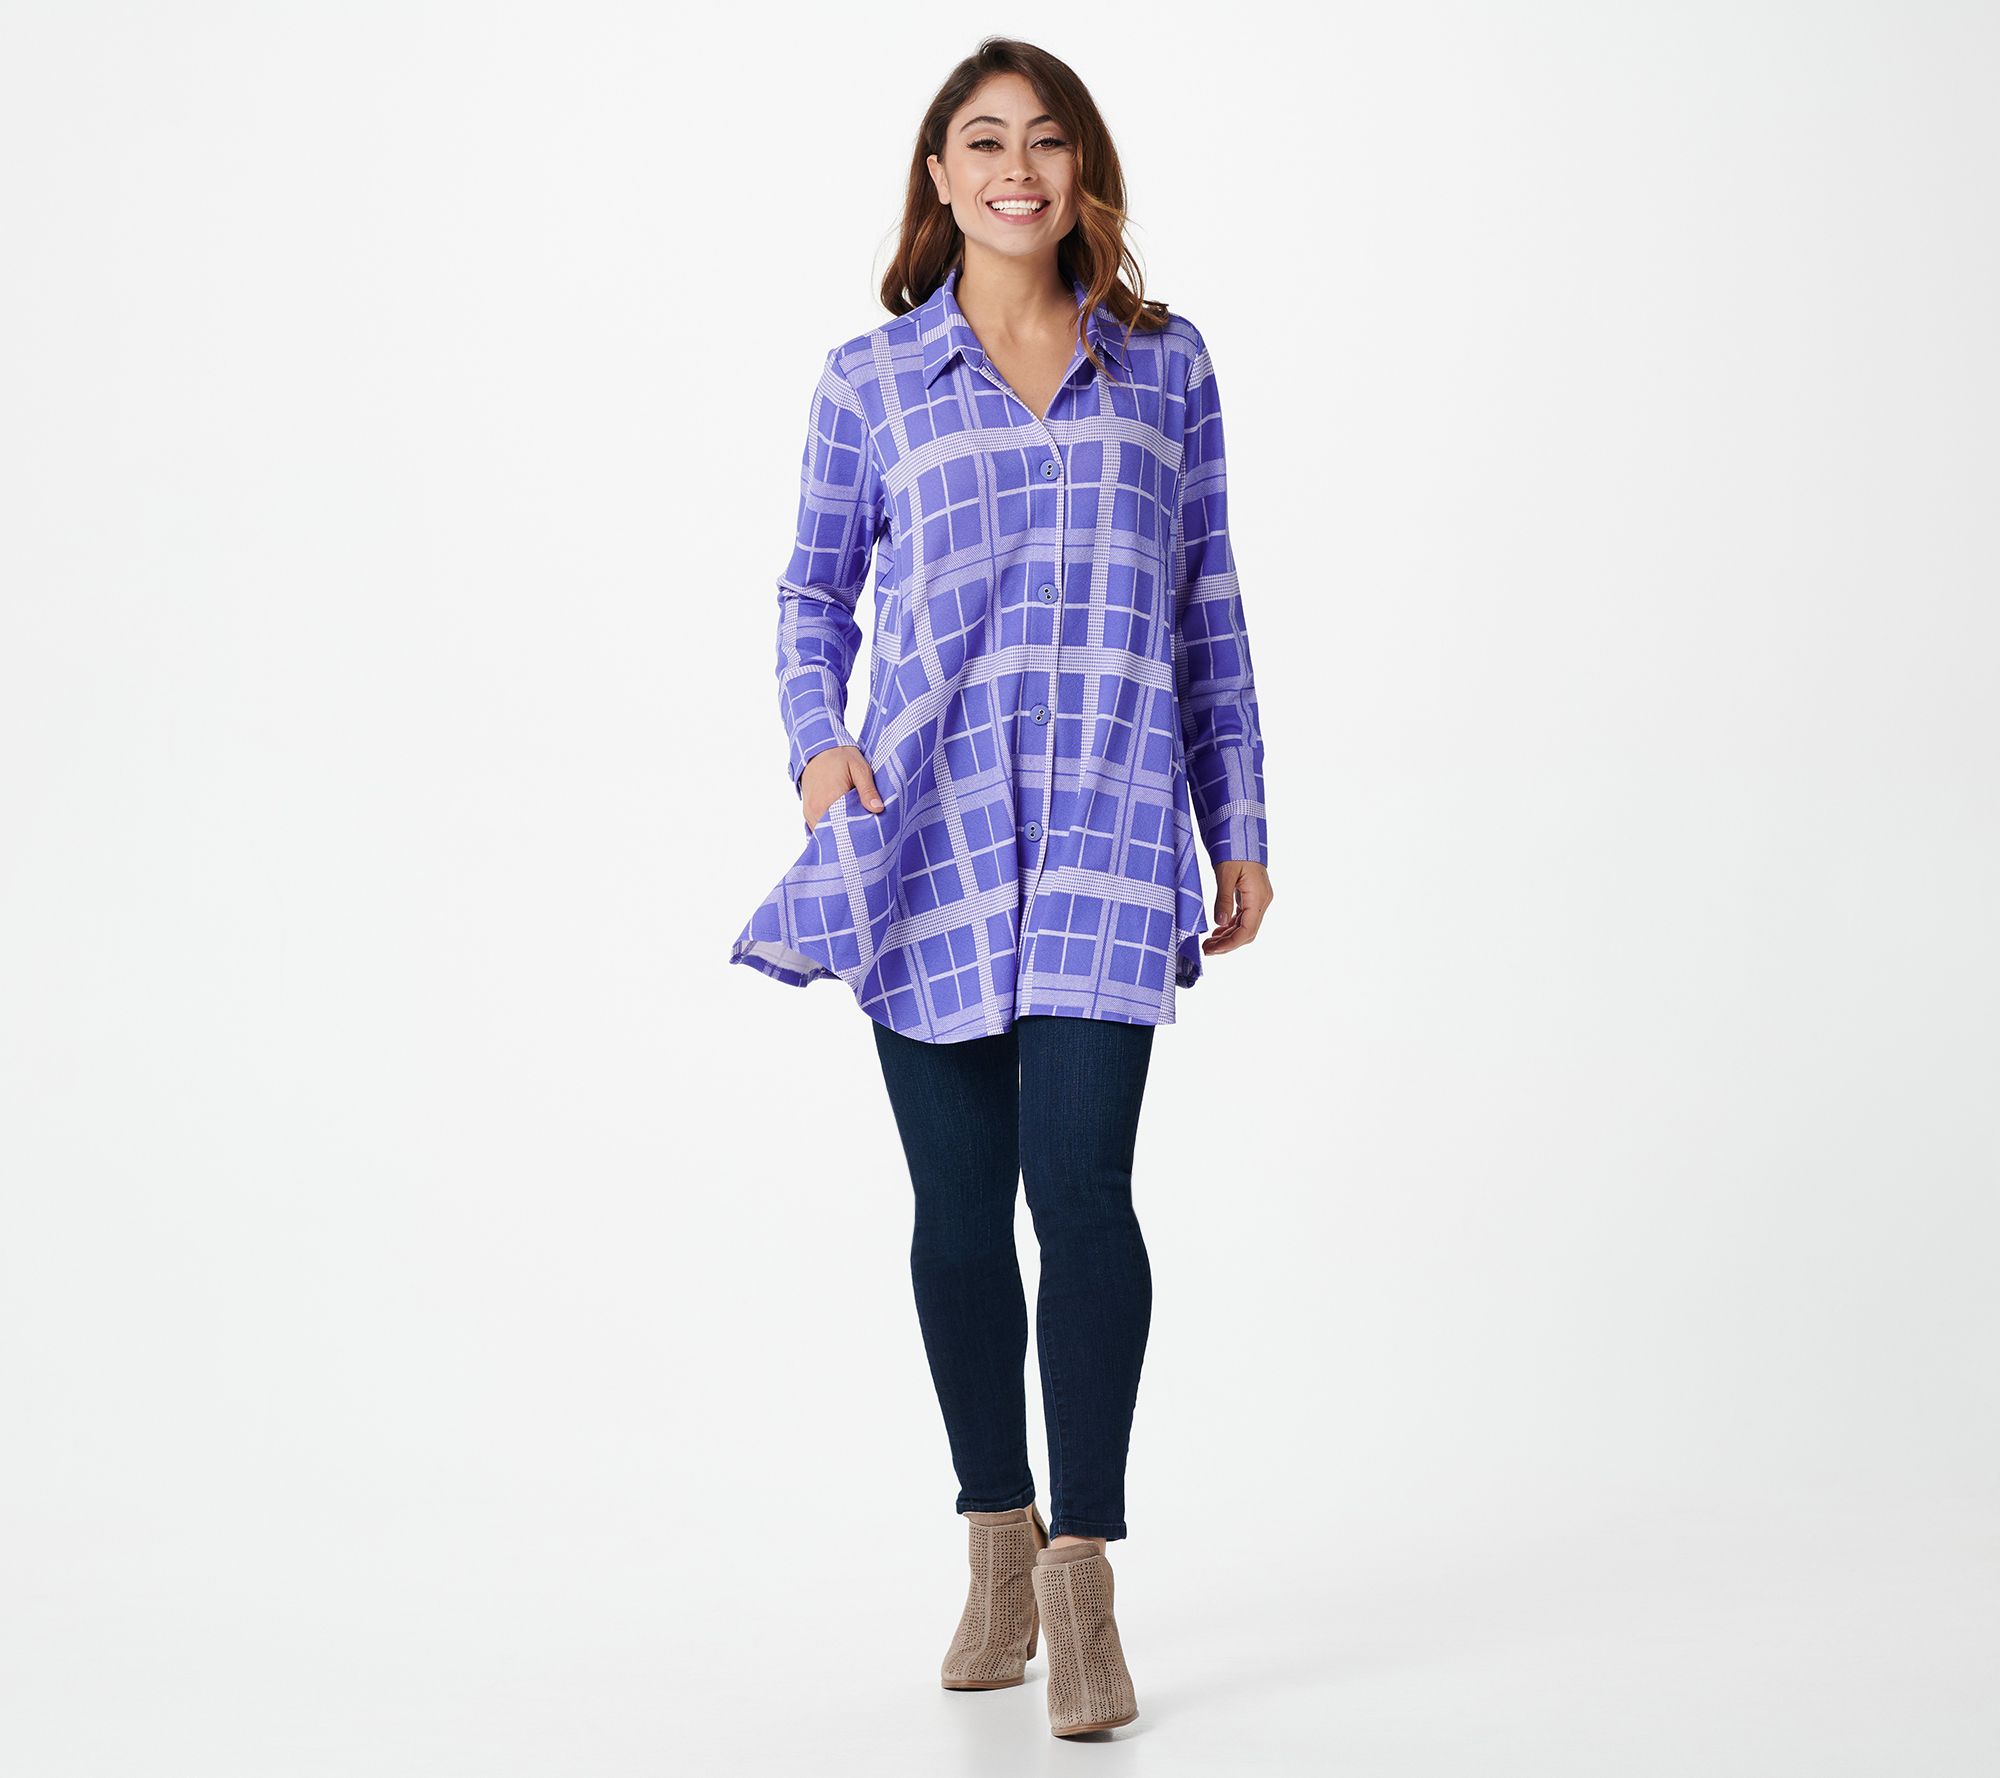 Attitudes by Renee Knit Swing Shirt with Pockets - QVC.com